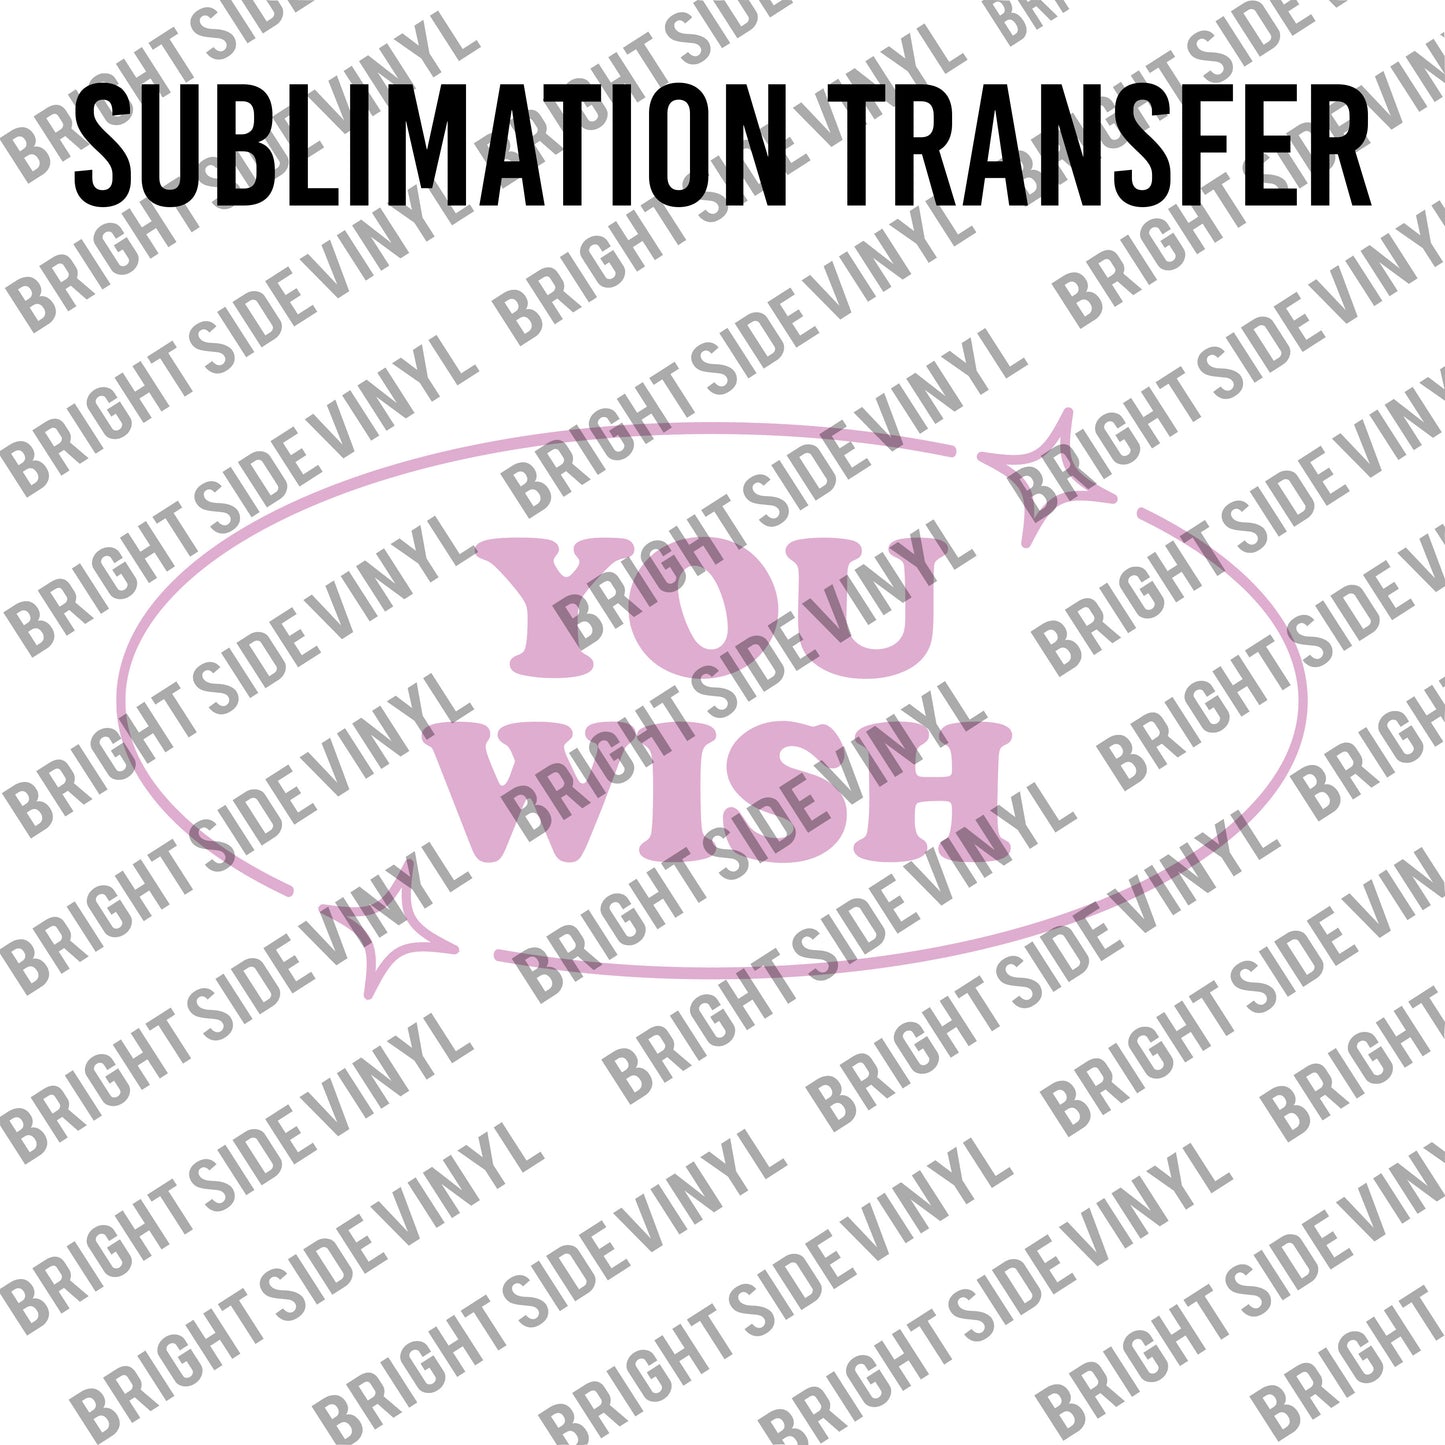 You Wish (Sublimation Transfer)